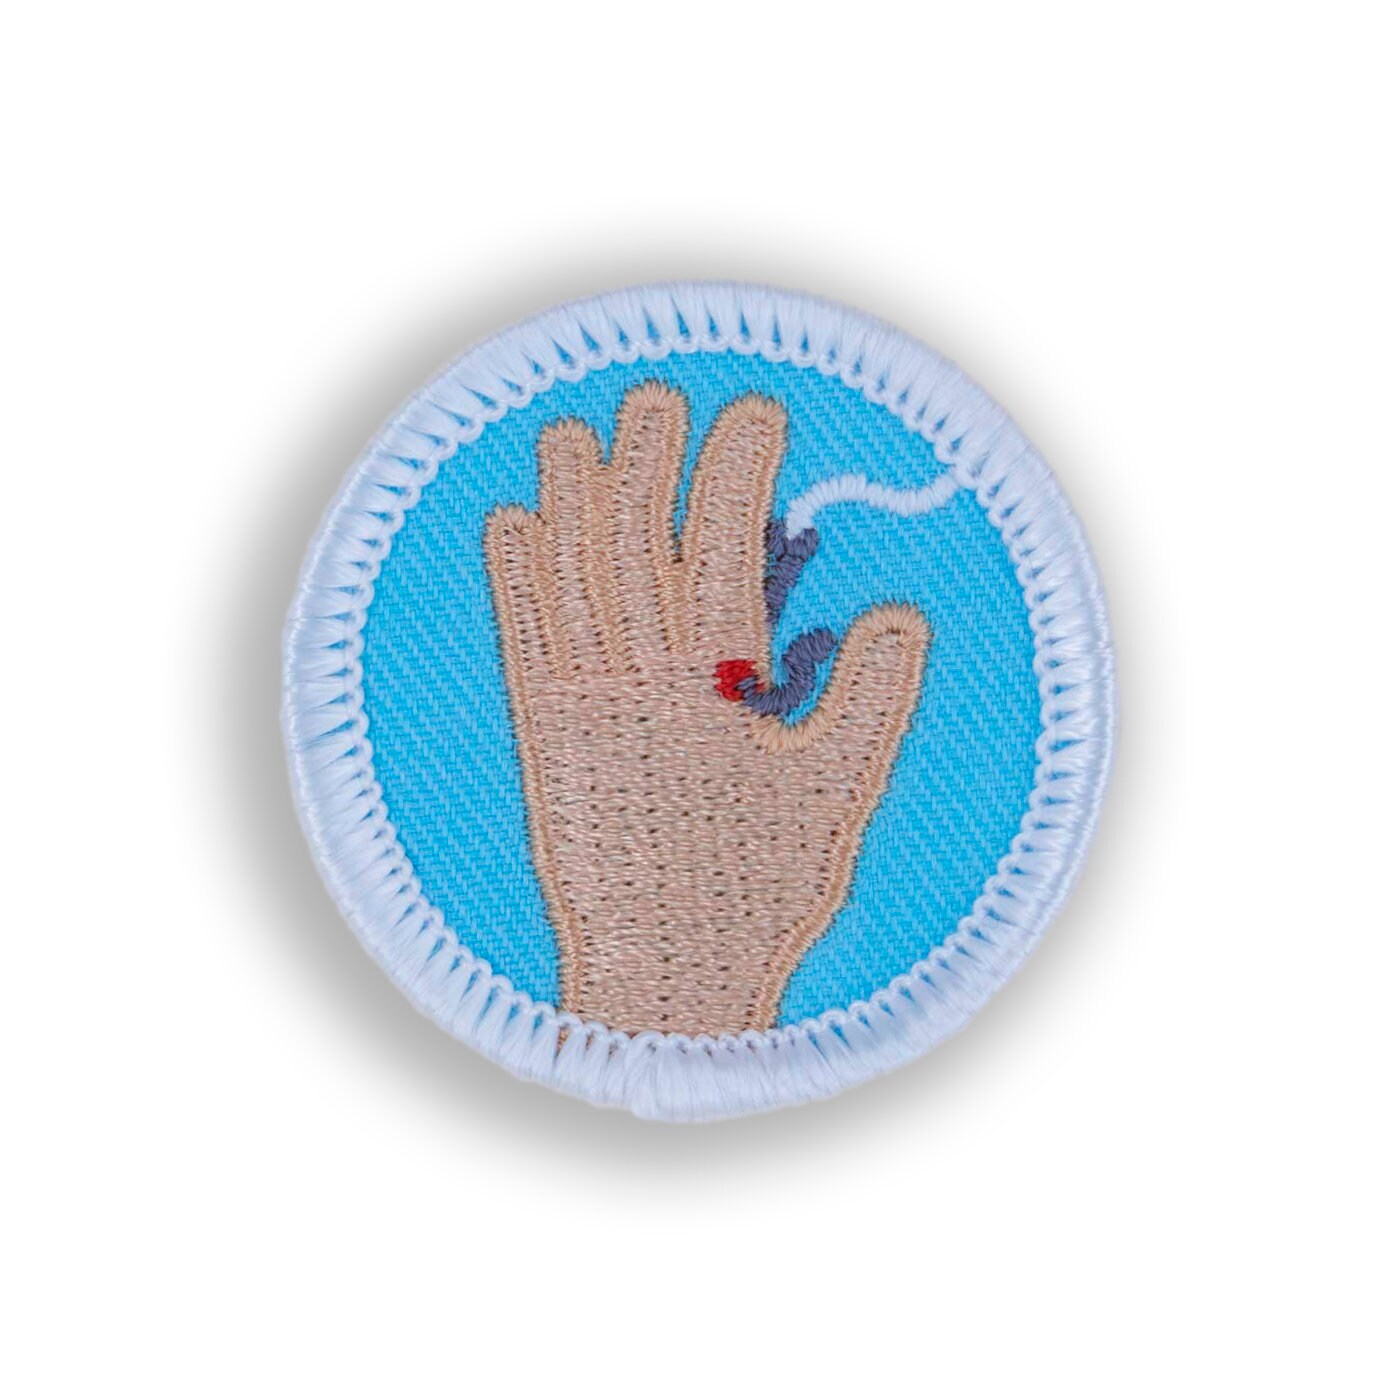 DIY Embroidery Patches Merit Badges - Ivy's First Fish Patch! - Making  Things is Awesome